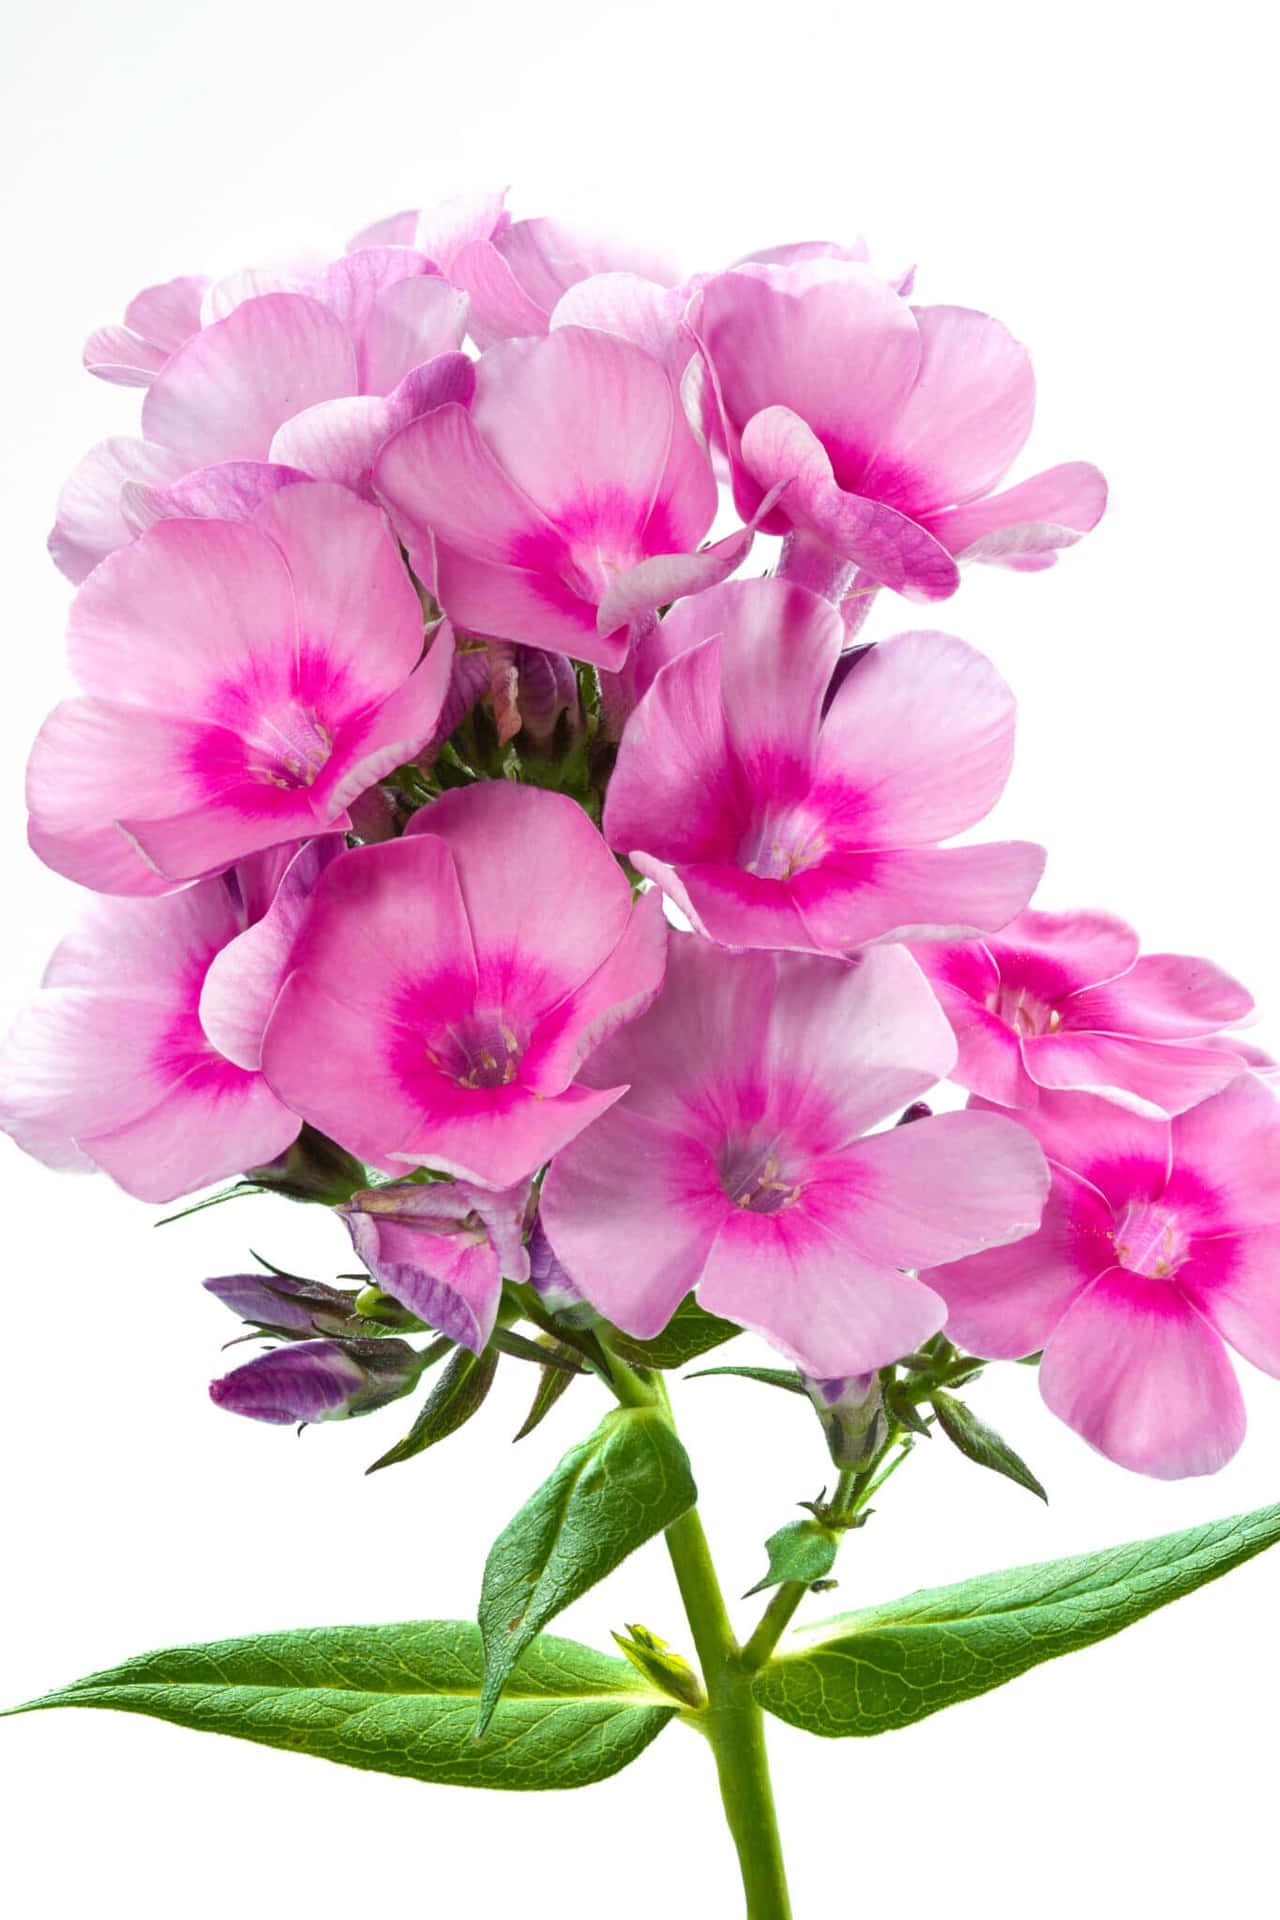 A Pink Flower Is In A Vase On A White Background